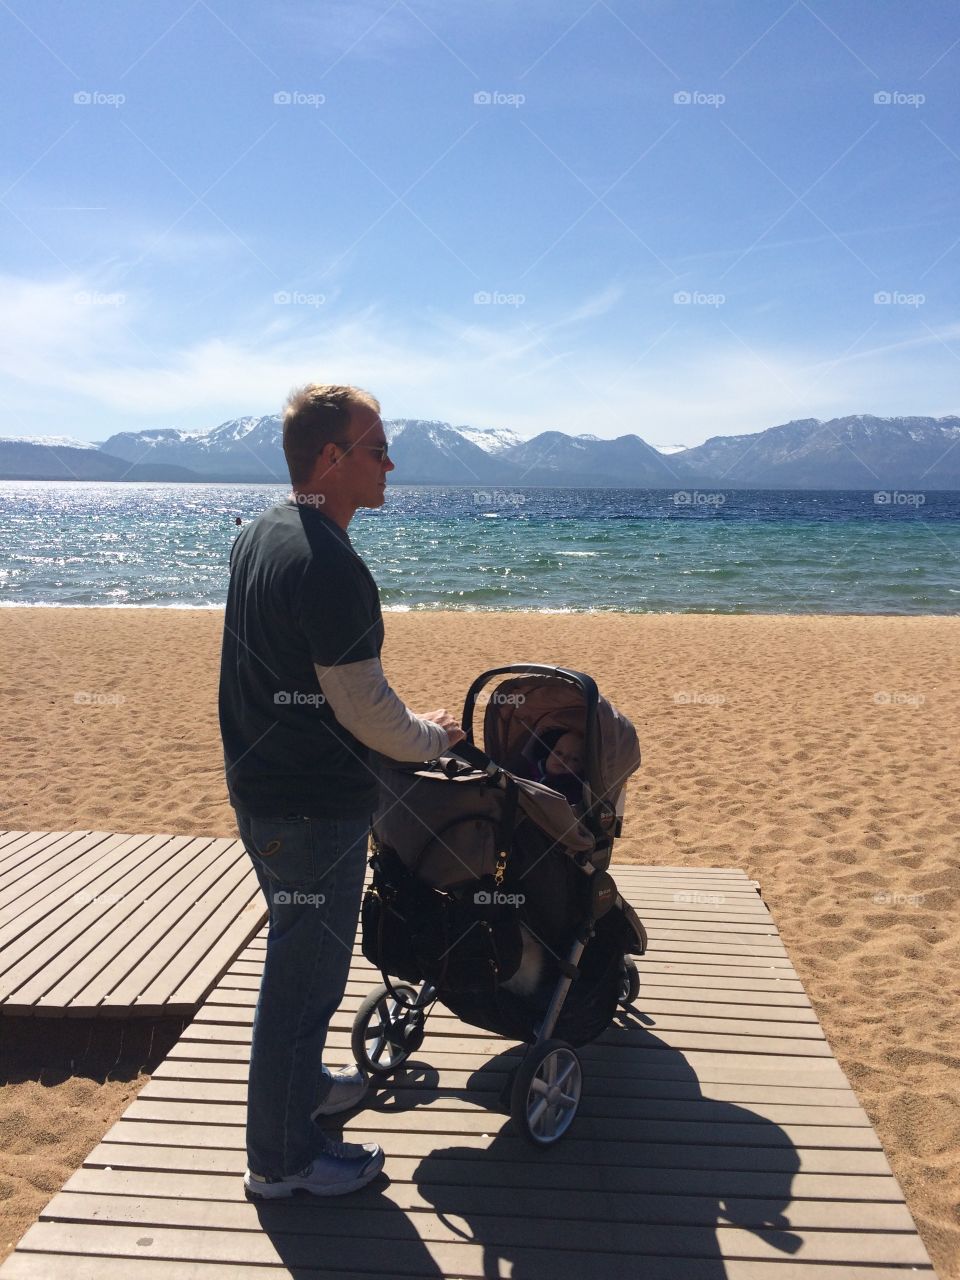 Father with Stroller. At Lake Tahoe a father stands with a baby stroller on the beach